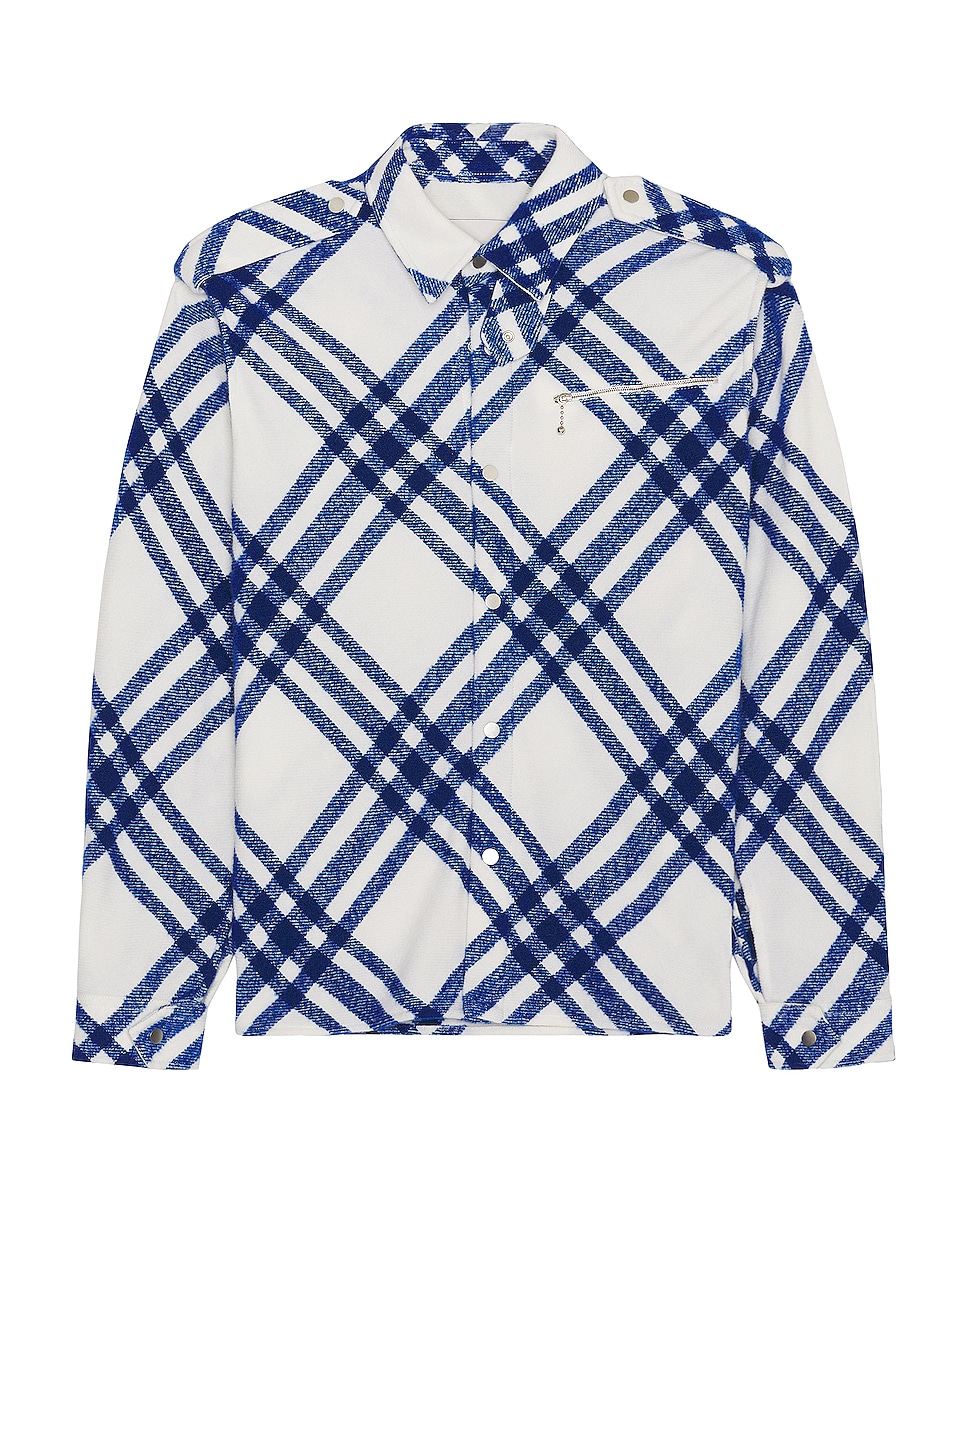 Image 1 of Burberry Check Jacket in Salt Ip Check